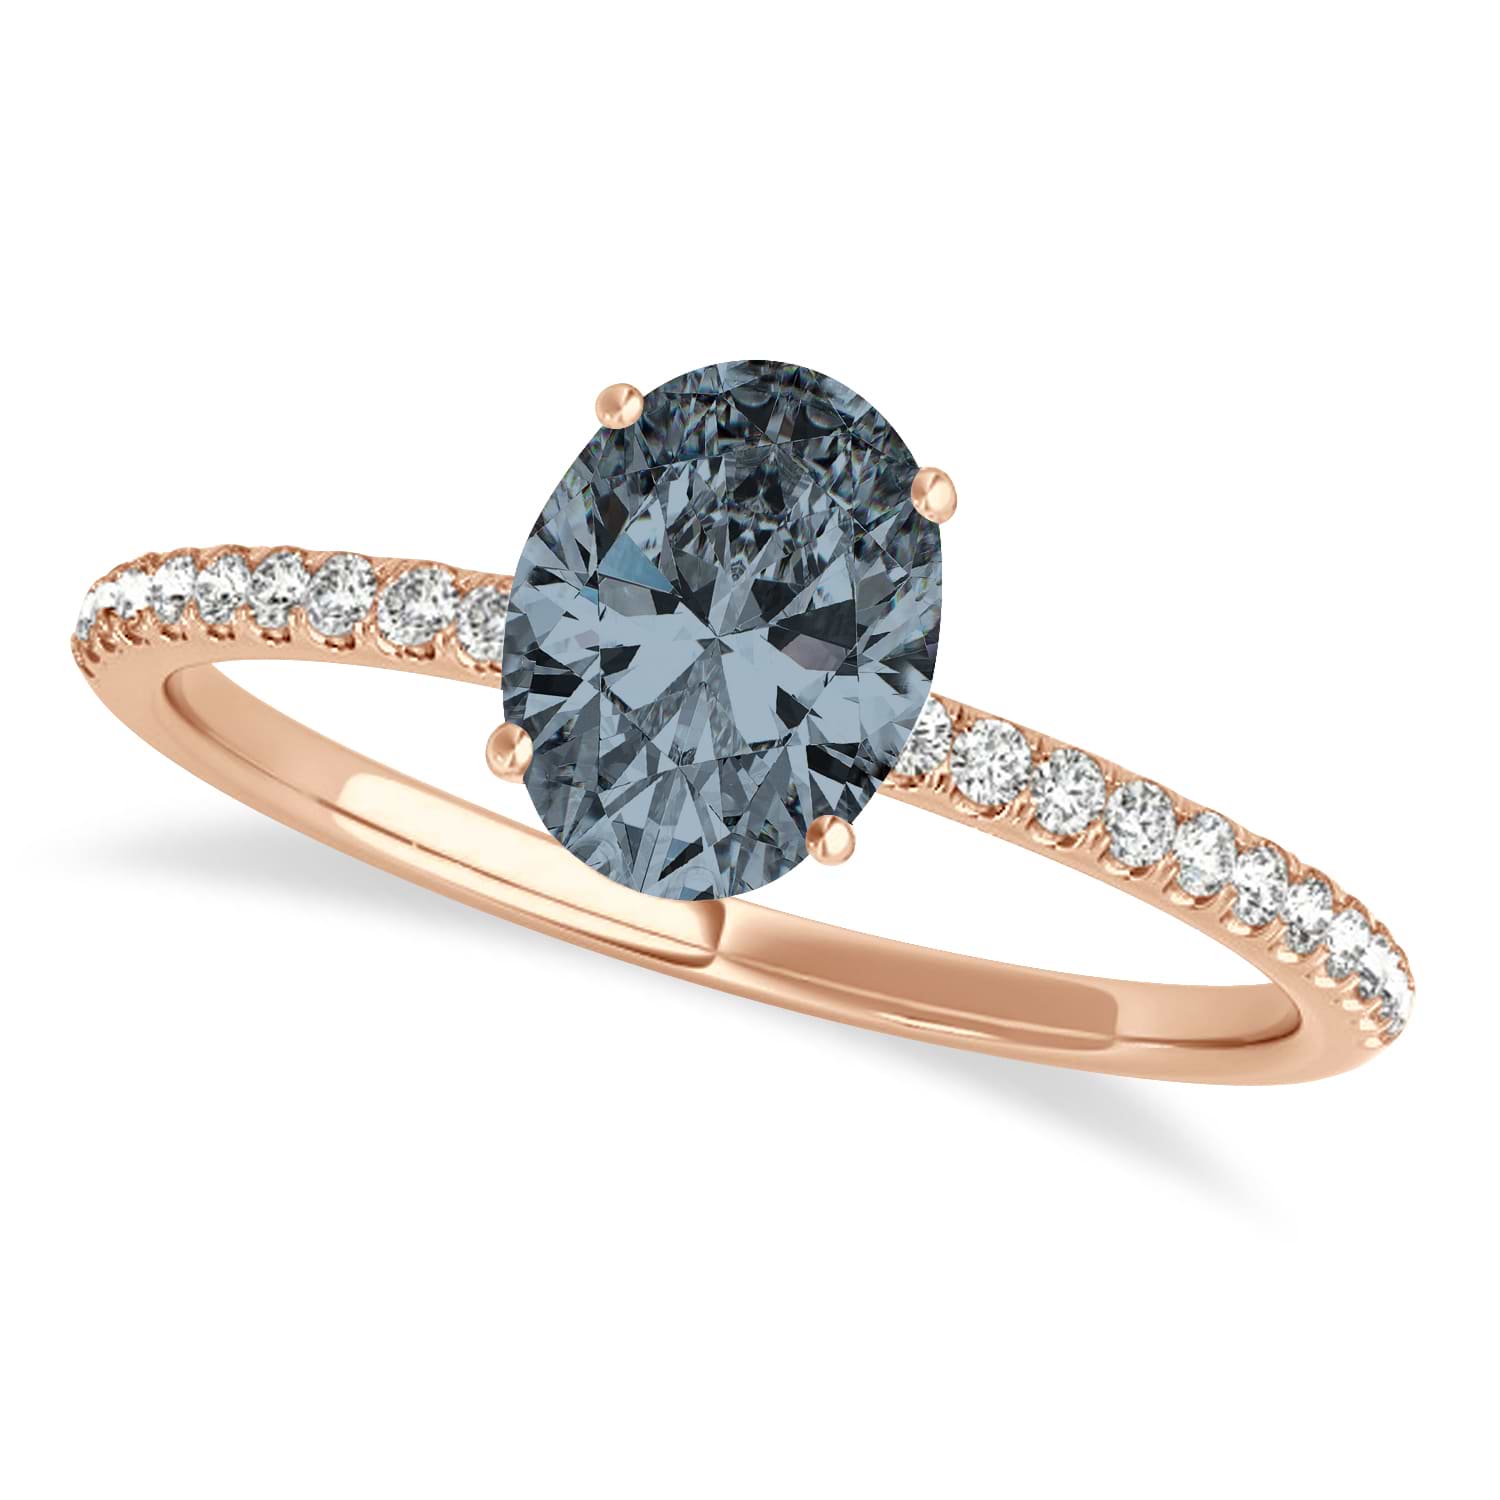 Gray Spinel & Diamond Accented Oval Shape Engagement Ring 14k Rose Gold (2.50ct)